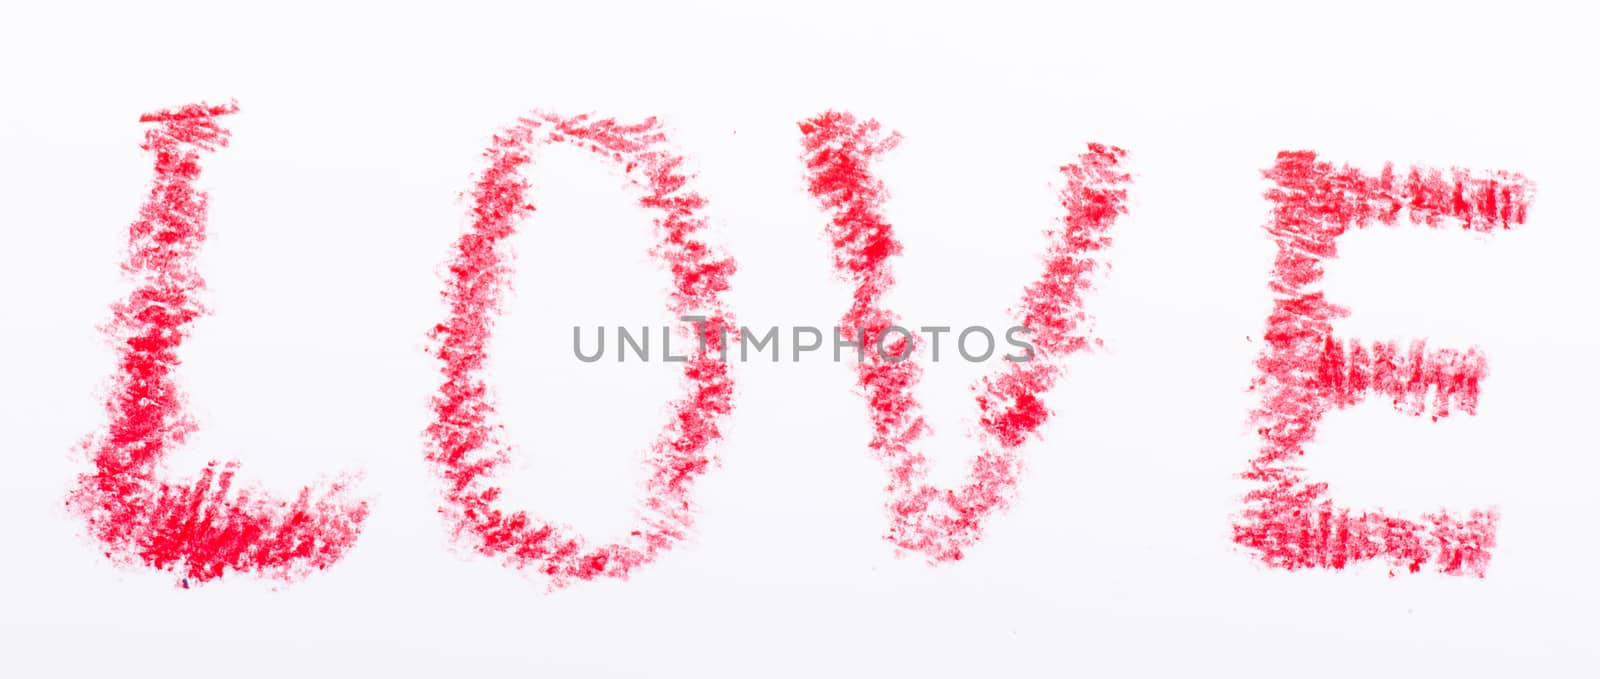 Pencil drawn love word with red 